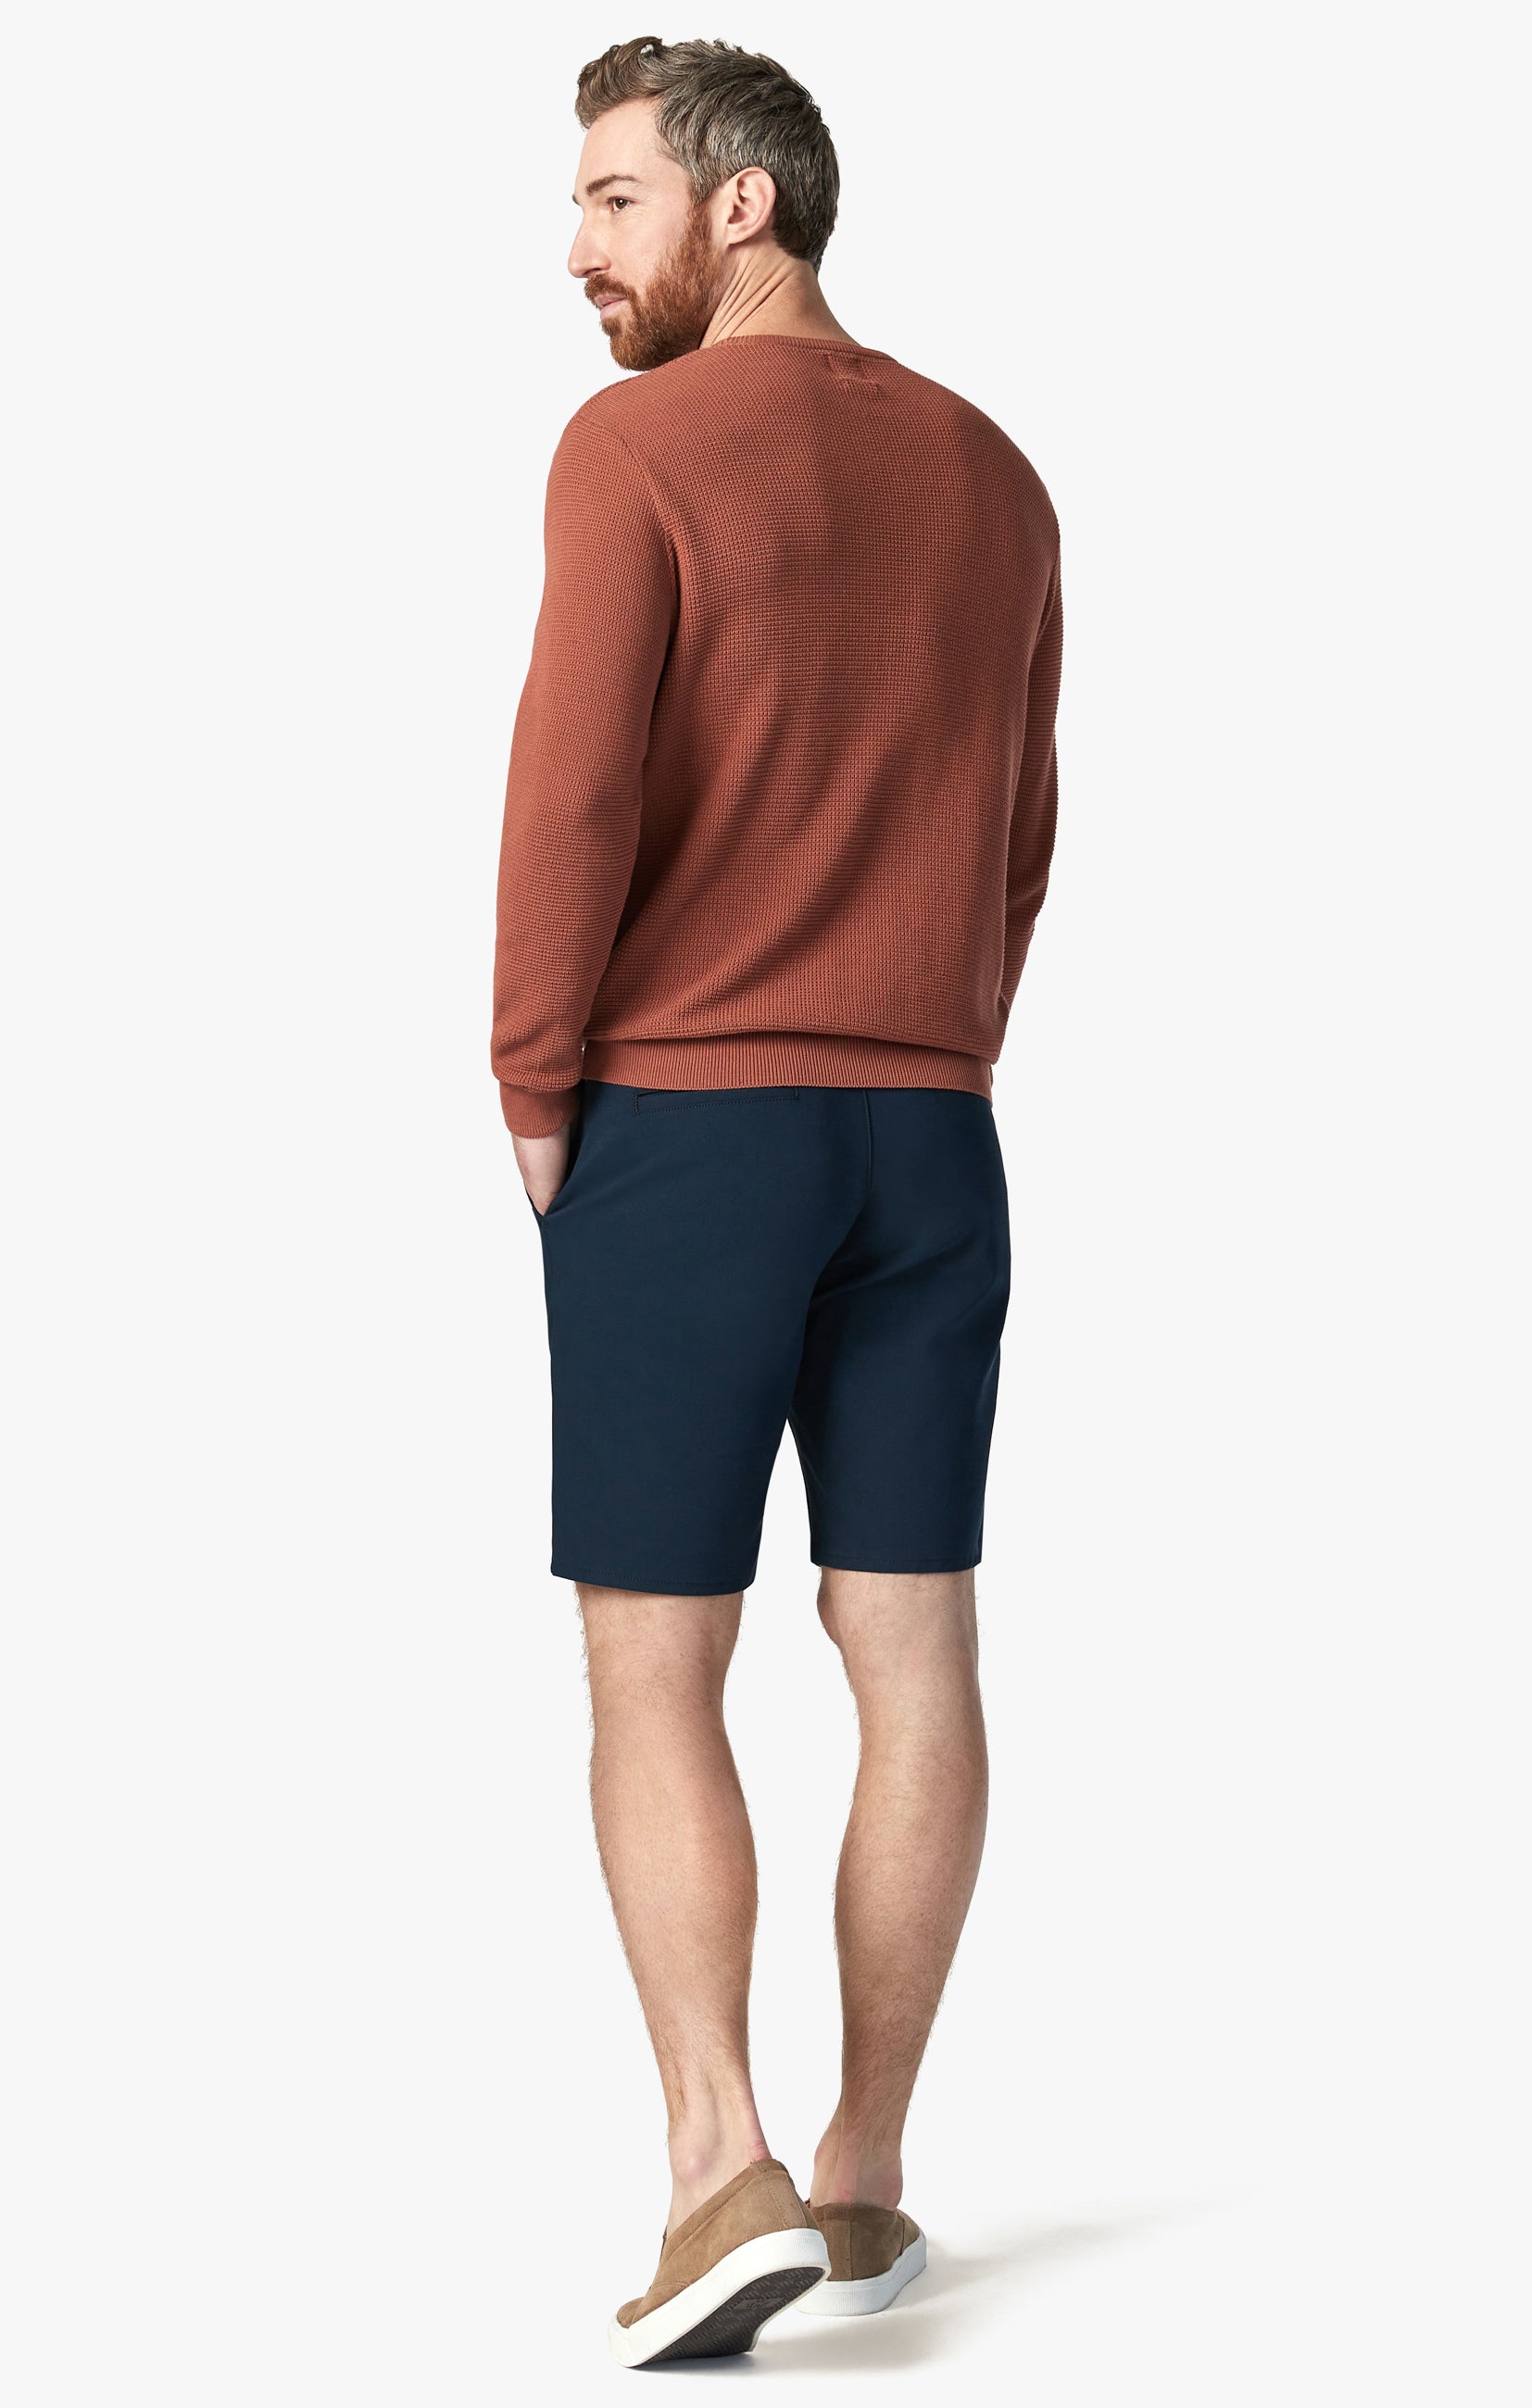 Como Shorts in Navy Commuter Image 4